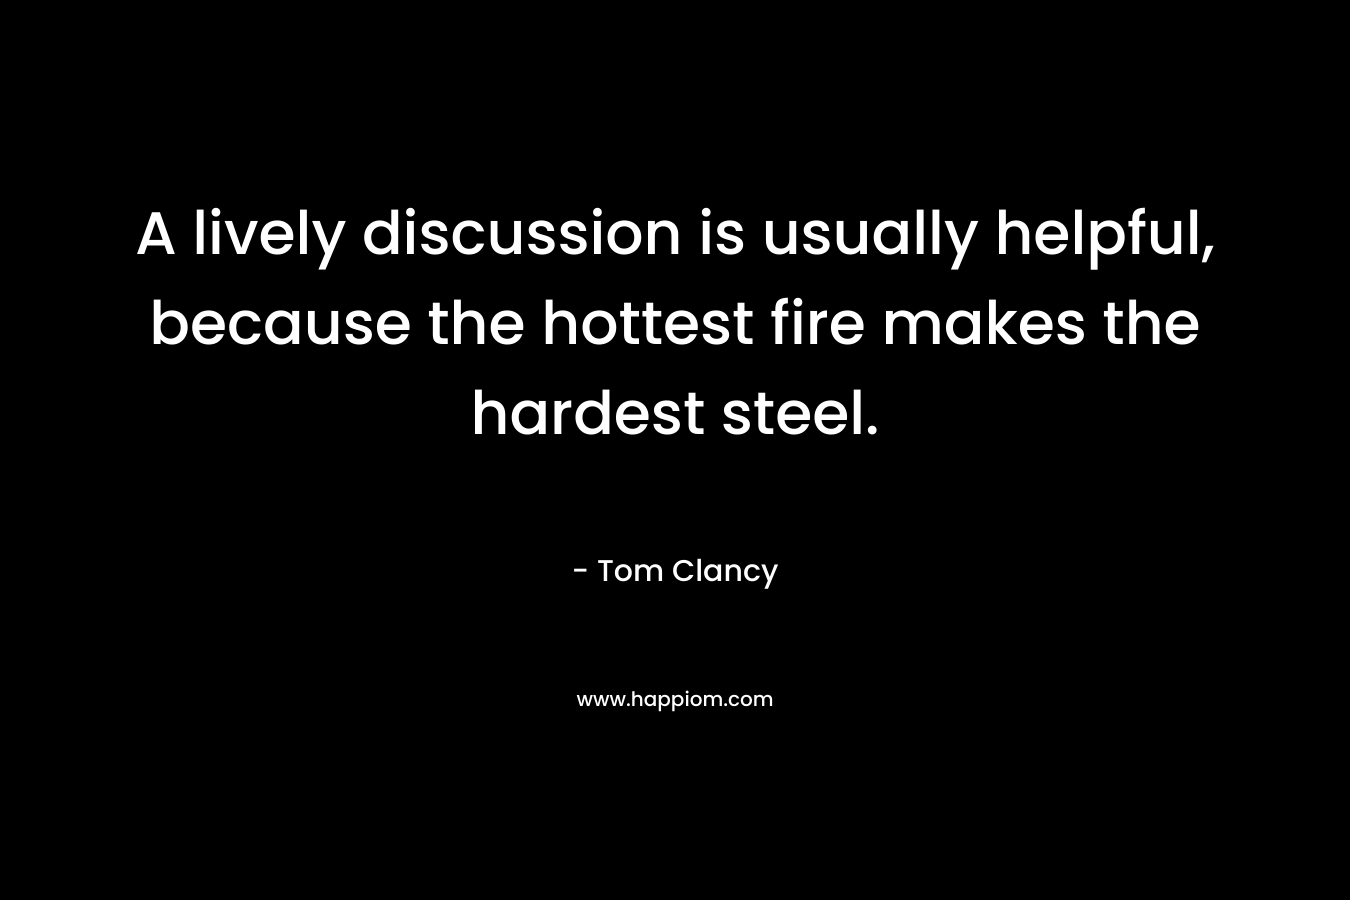 A lively discussion is usually helpful, because the hottest fire makes the hardest steel. – Tom Clancy